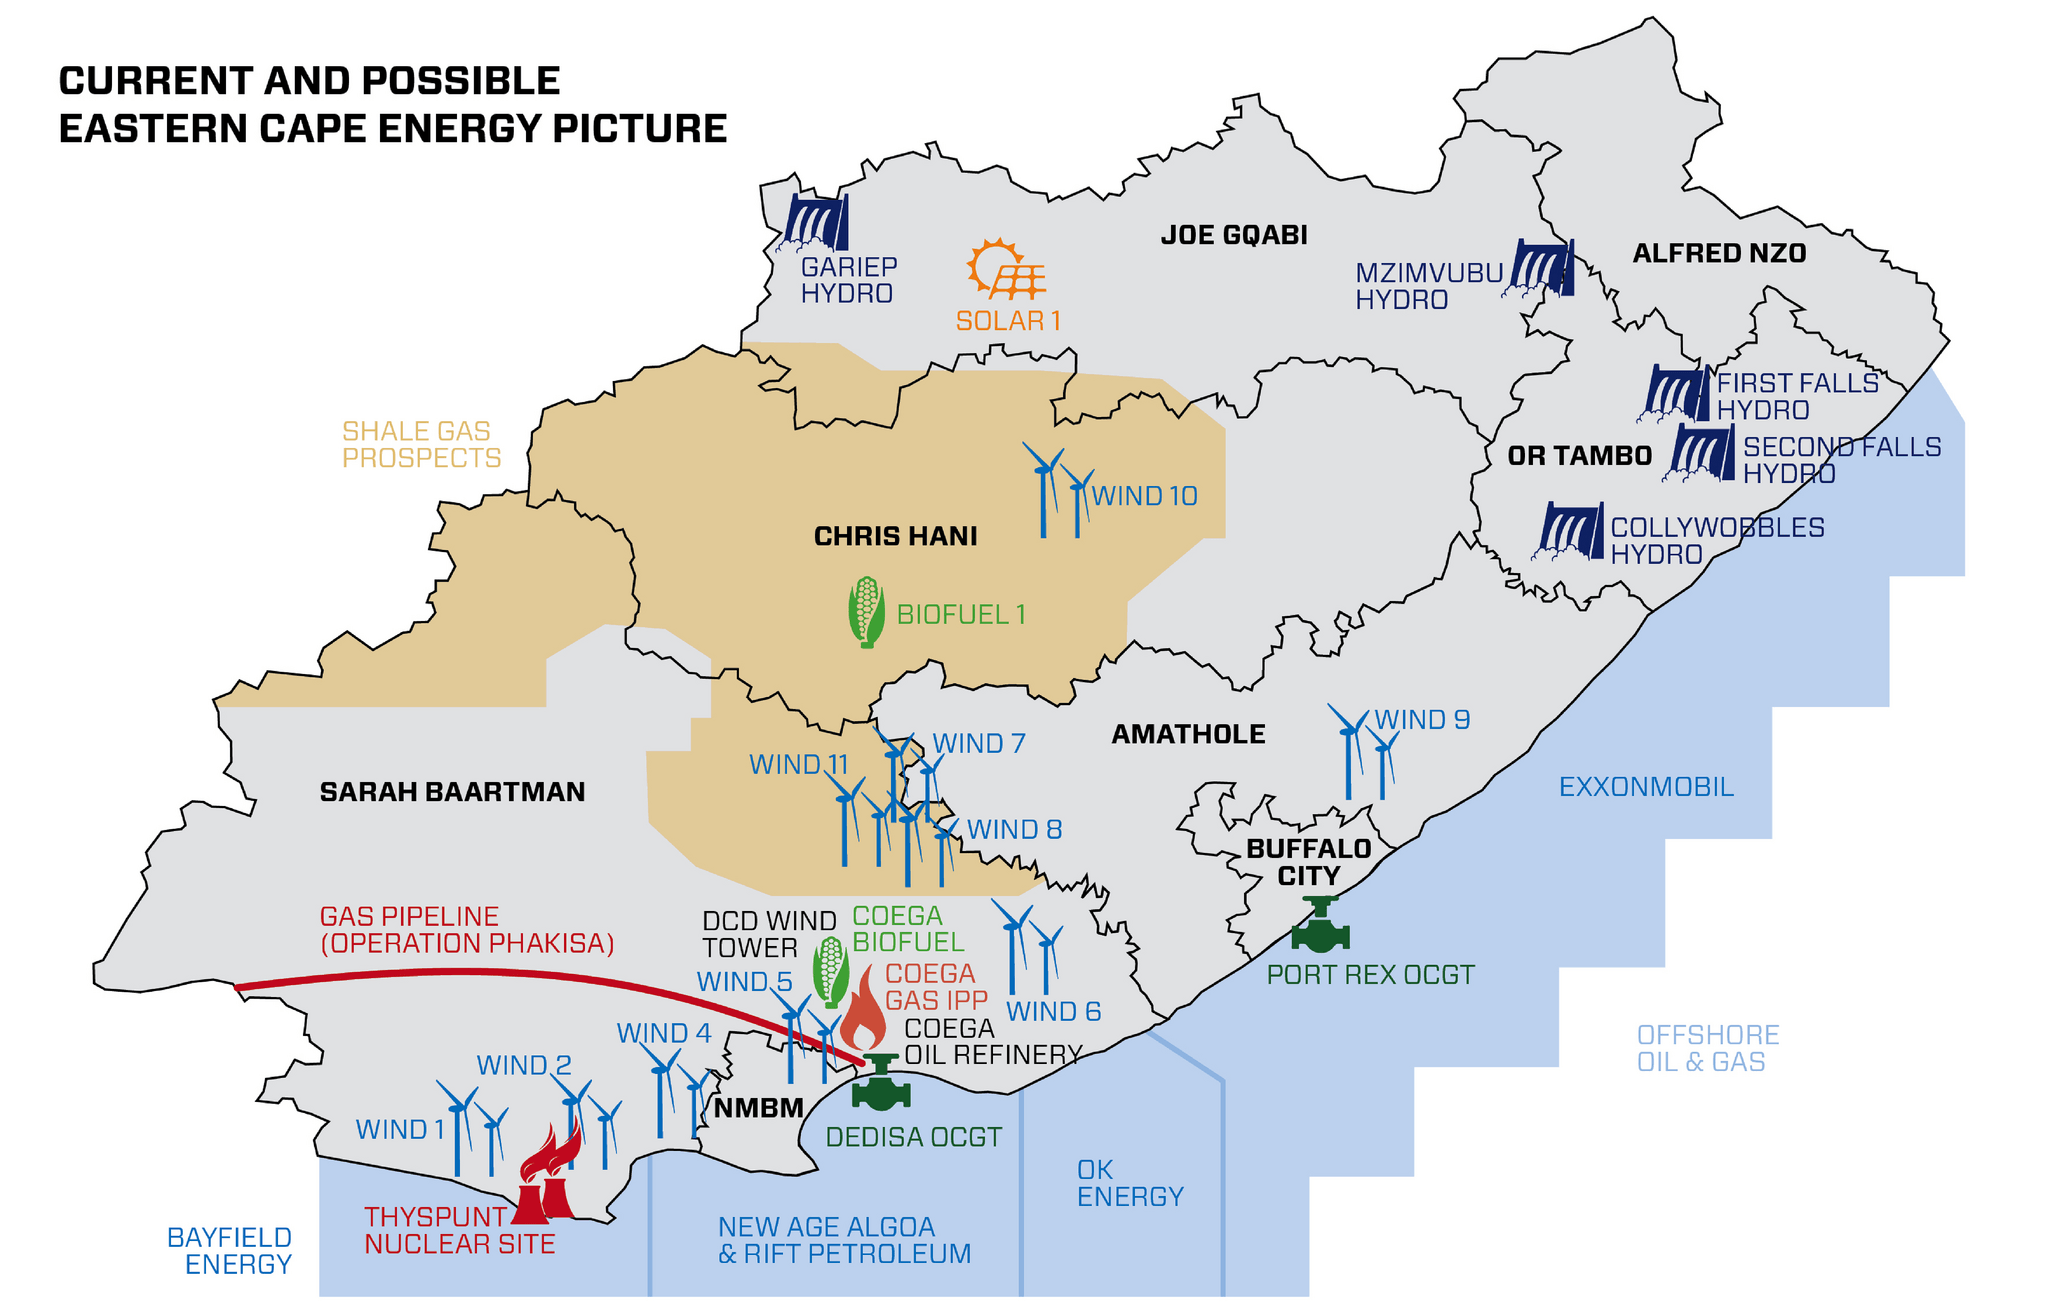 Eastern Cape poised for exciting Energy Developments